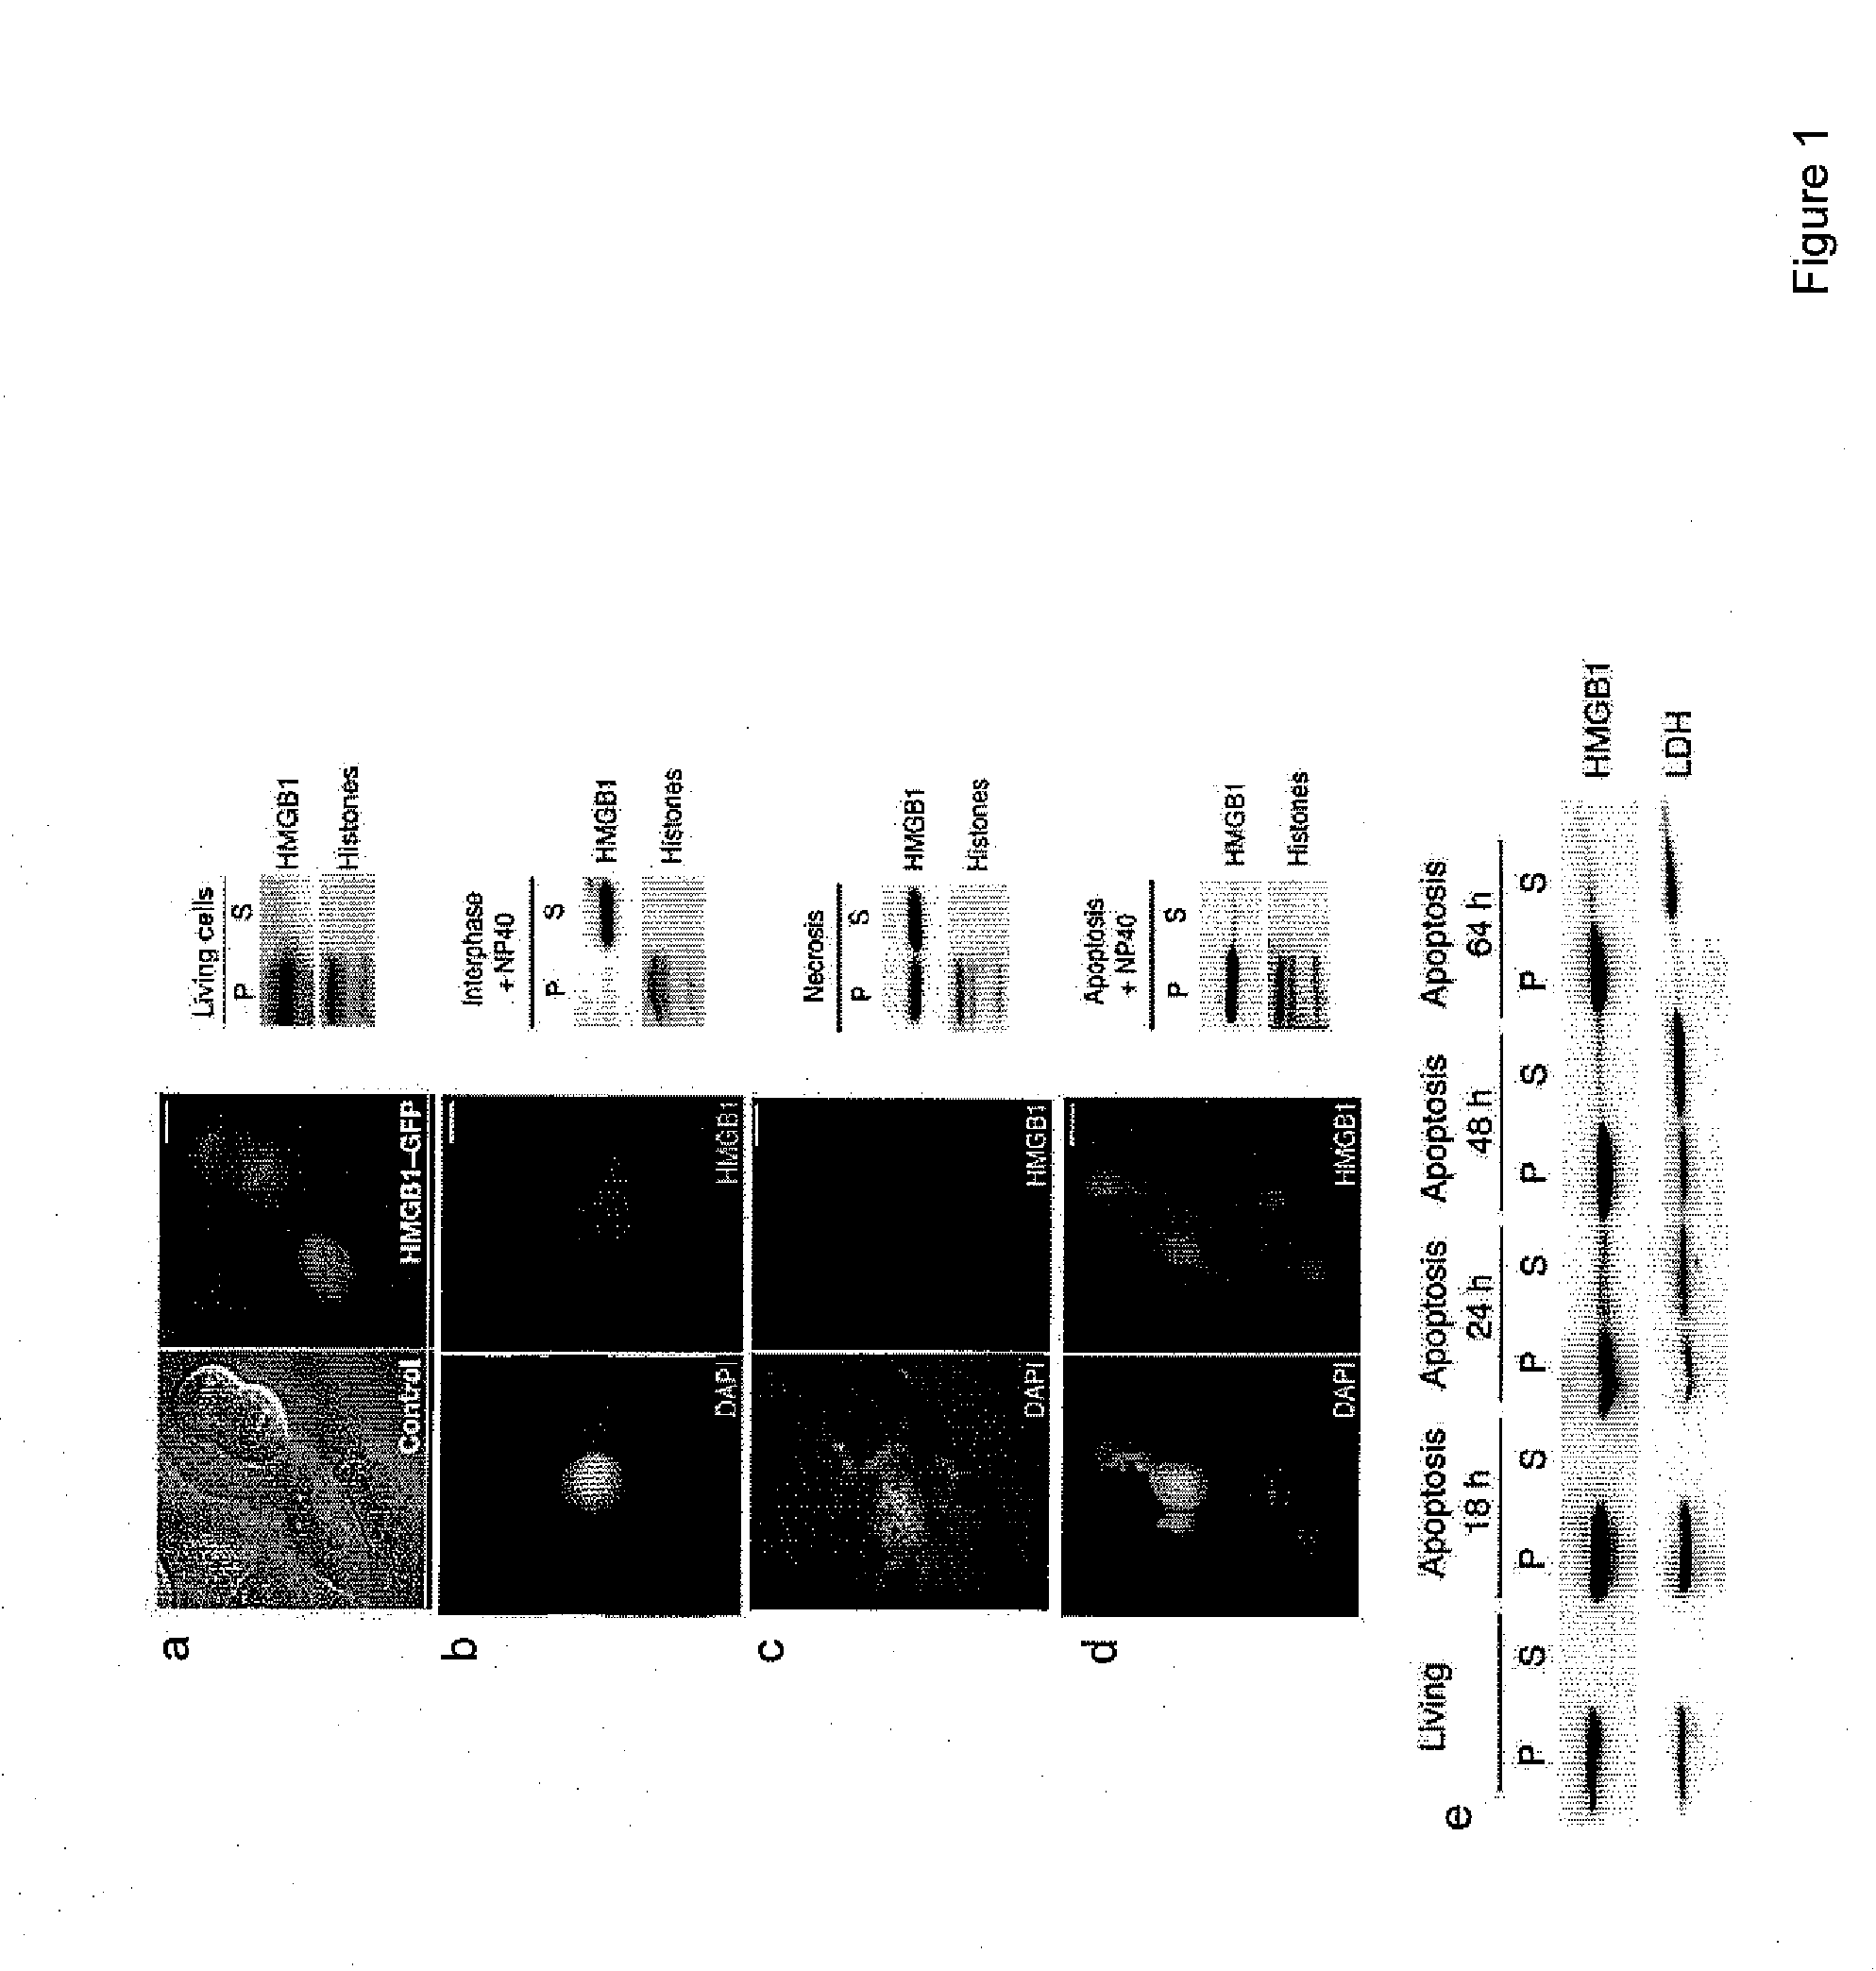 Use of HMGB1 to promote stem cell migration and/or proliferation